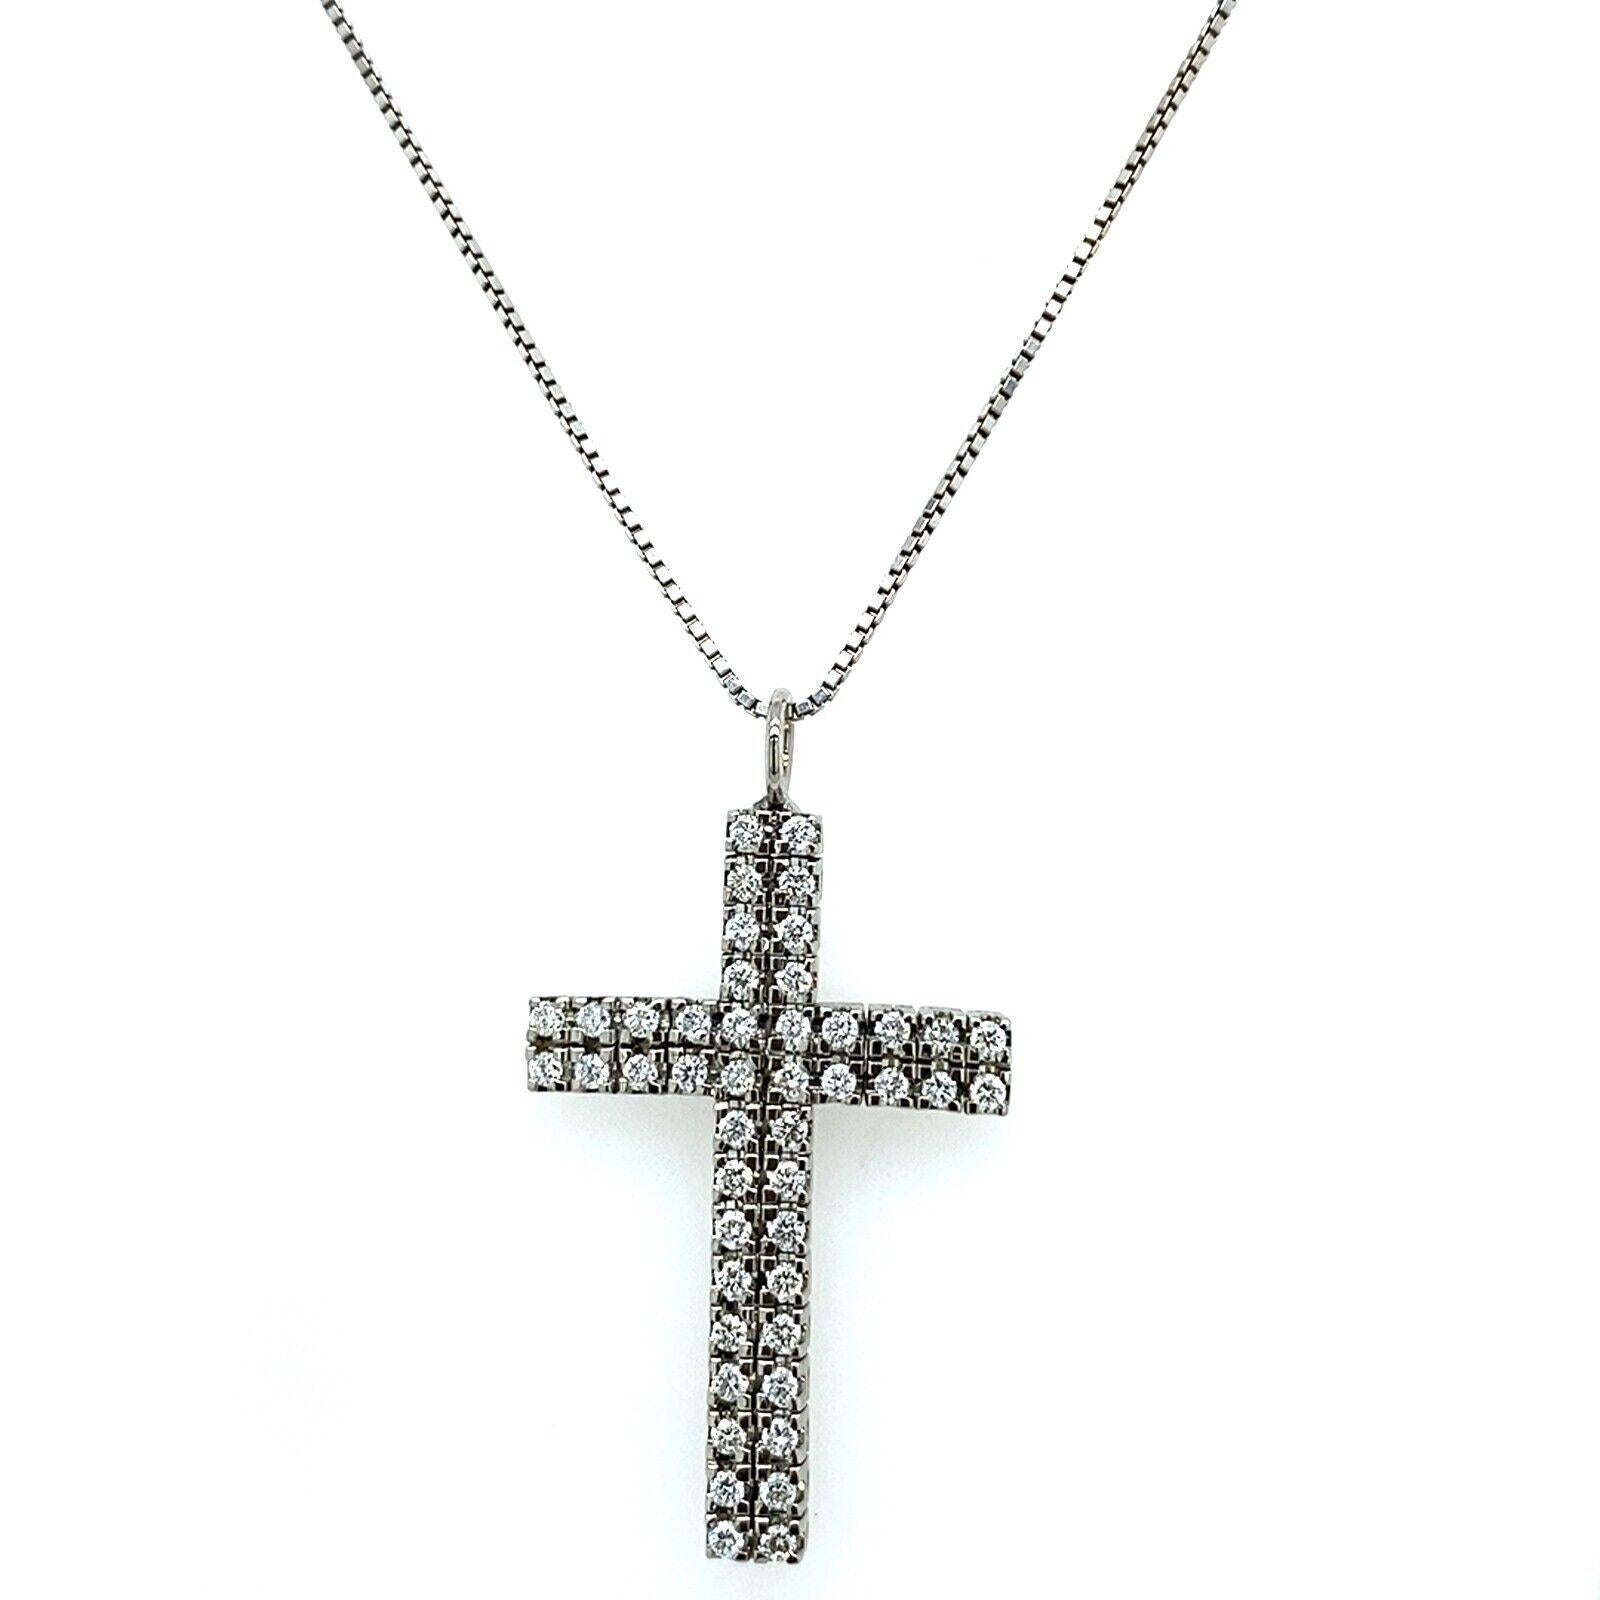 This delicate 18ct White Gold Diamond cross, features a total of 1.0ct F-G/VS round brilliant cut Diamonds, suspended on an 18ct White Gold chain. This pendant is a perfect gift for your loved ones.

Additional Information: 
Total Diamond Weight: